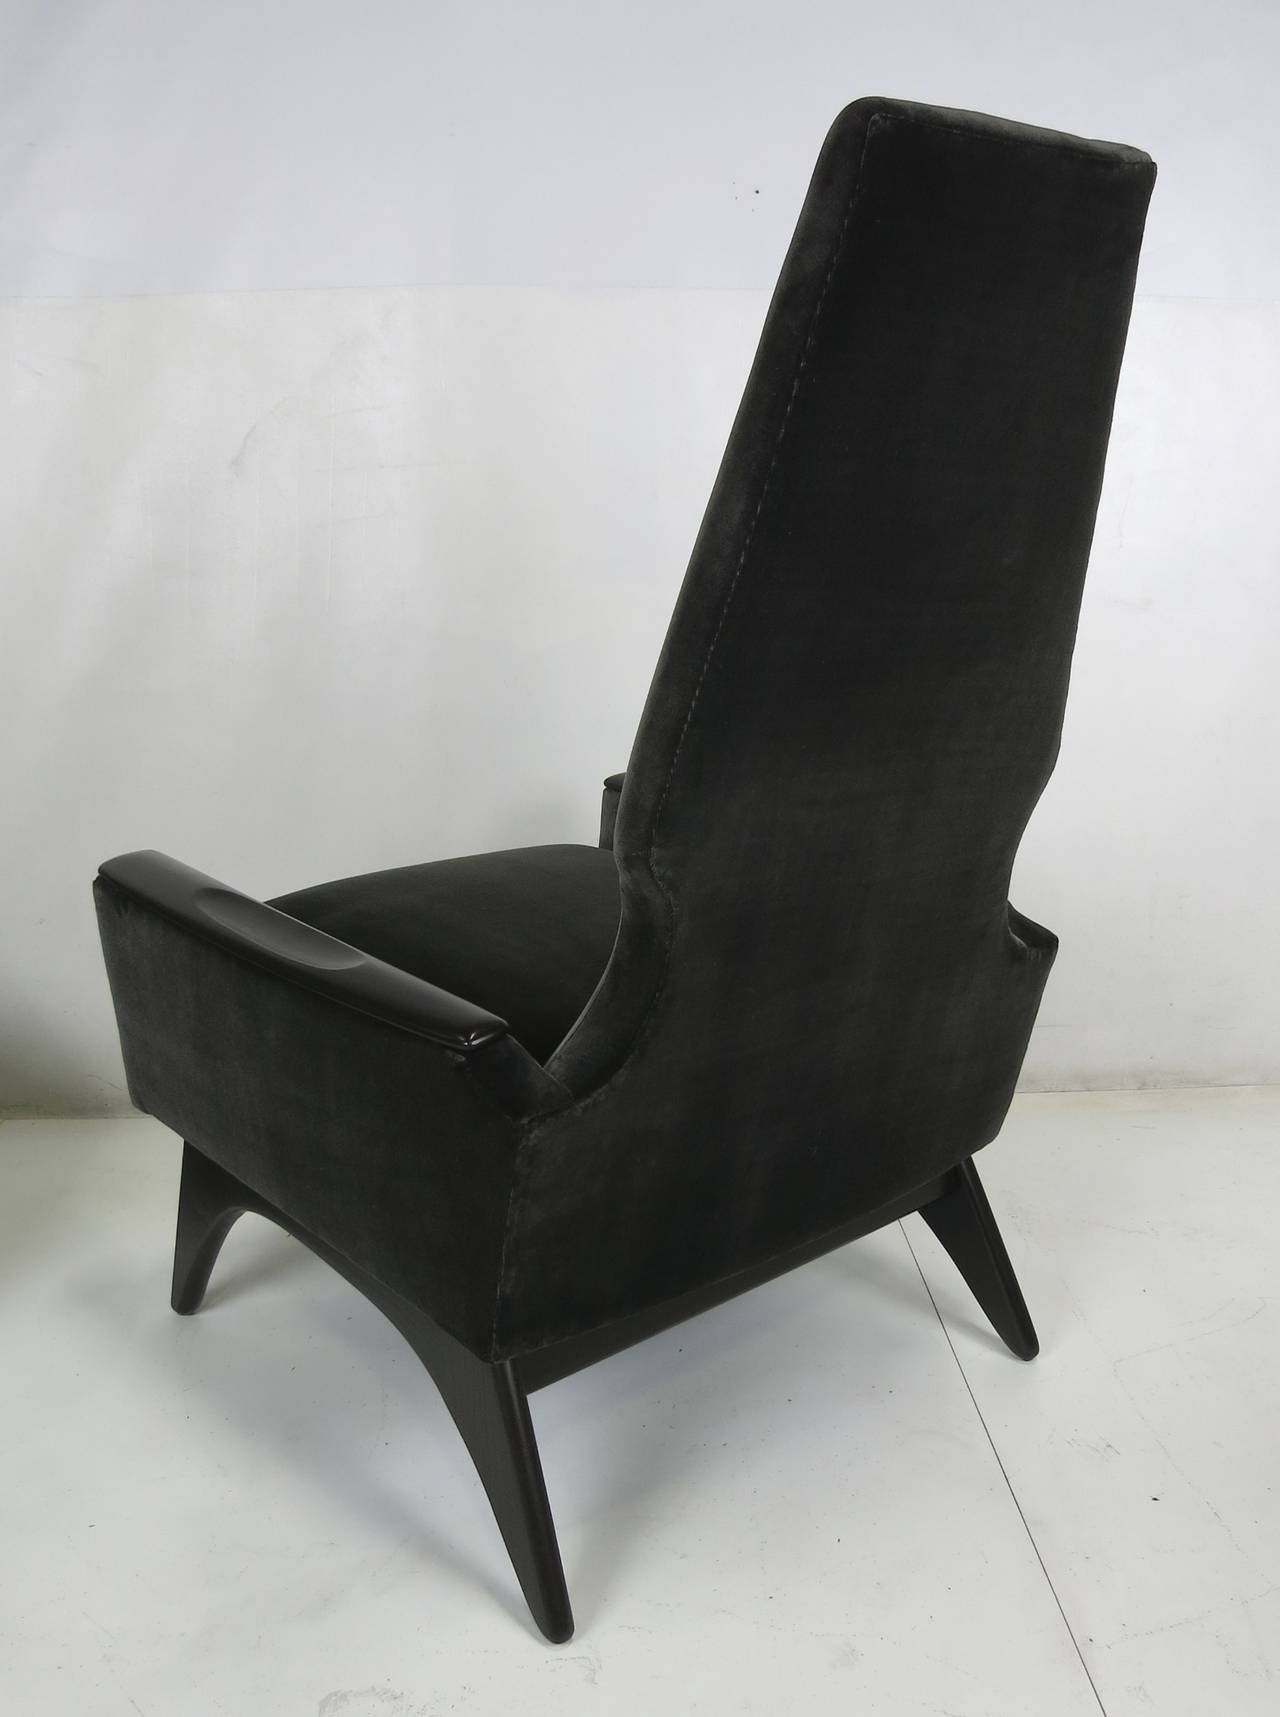 Mid-20th Century Futurist Modern Lounge Chair and Ottoman by Adrian Pearsall for Craft Associates